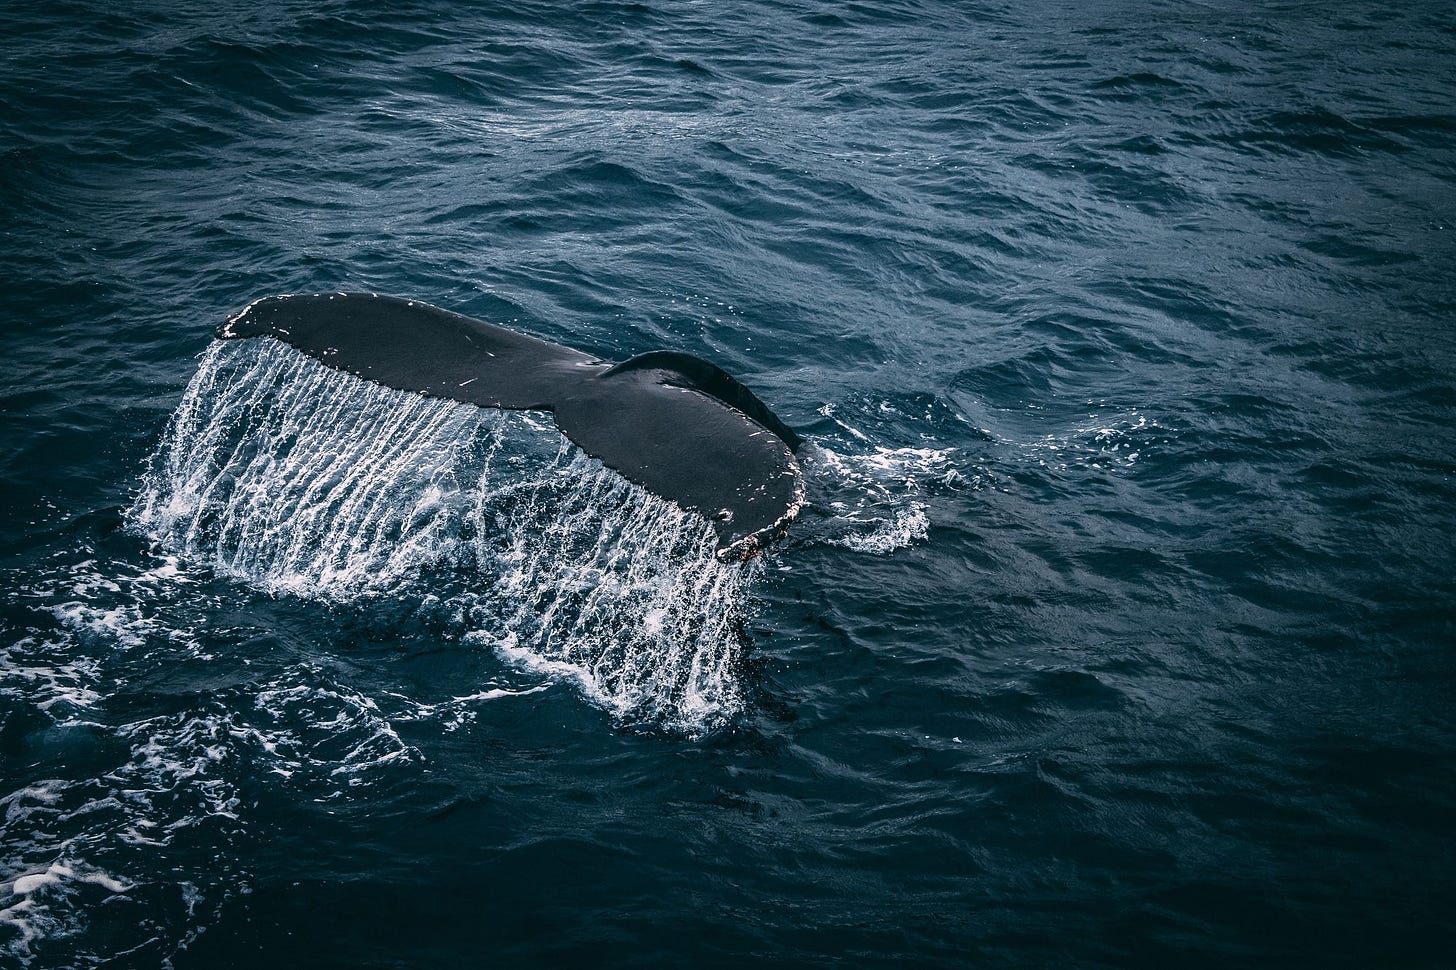 image of whale tail by Rudolf Kirchner via Pexels